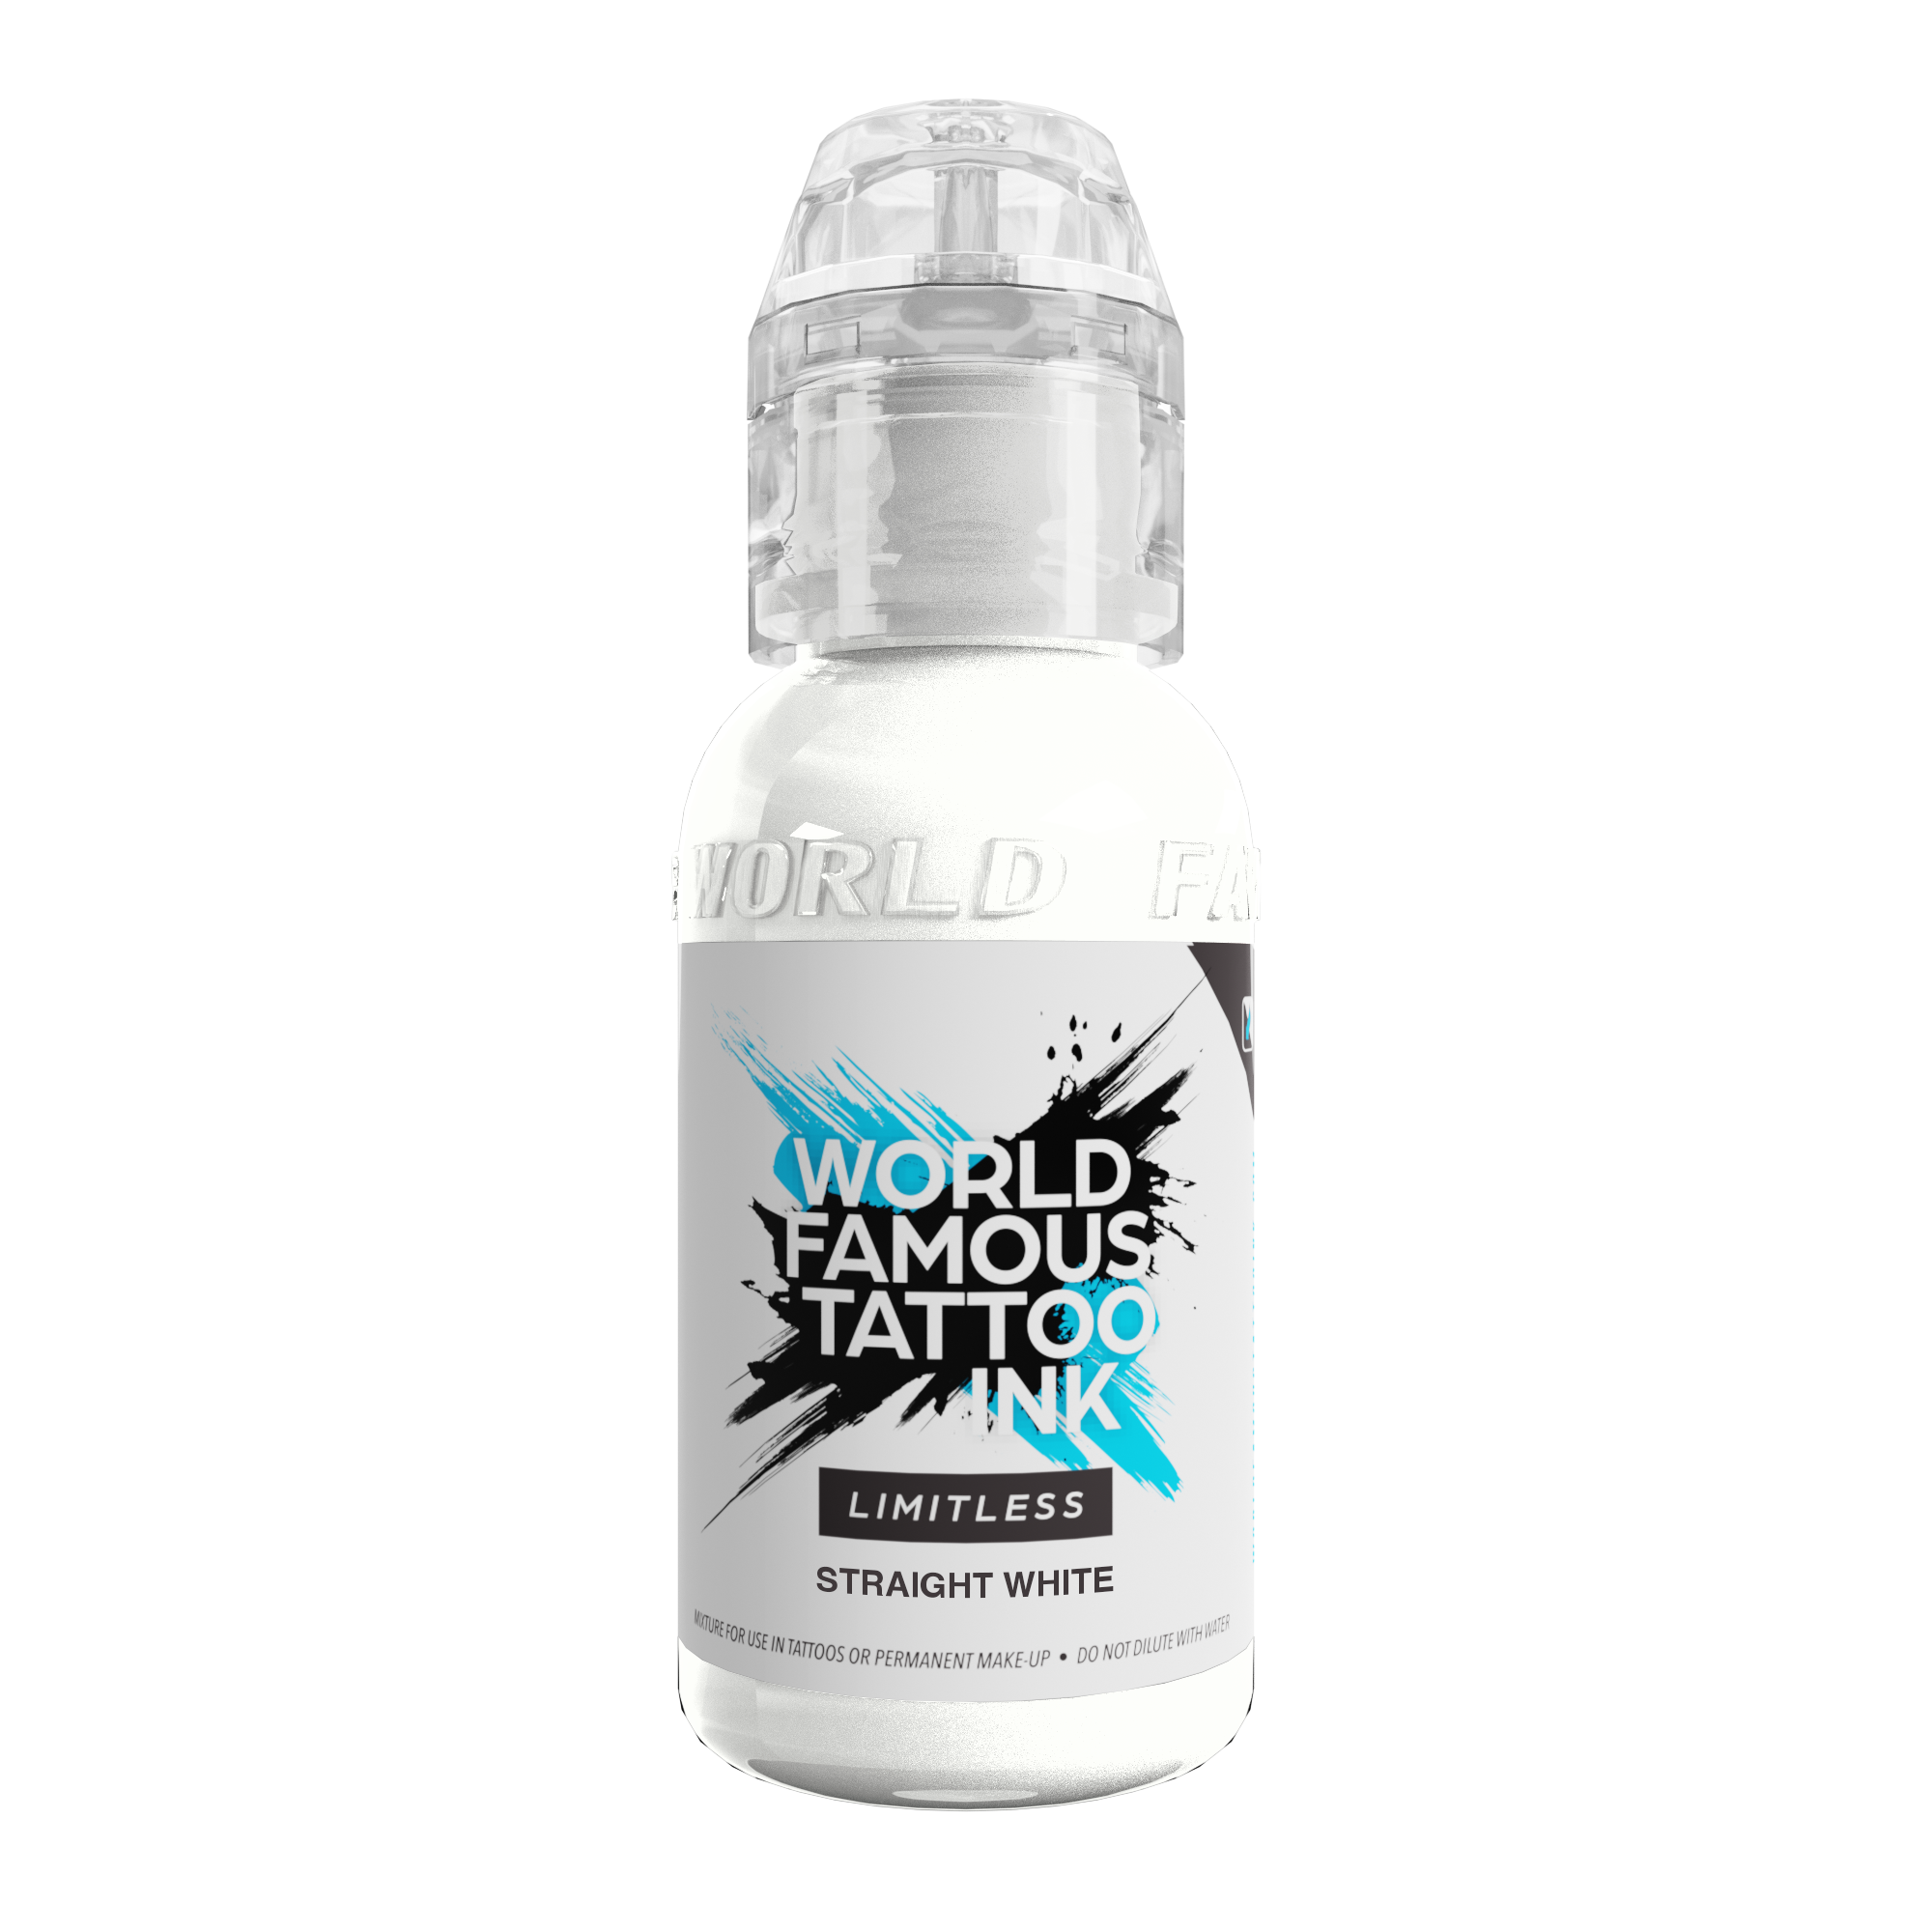  World Famous - Limitless Tattoo Ink - Straight White - 30 ml